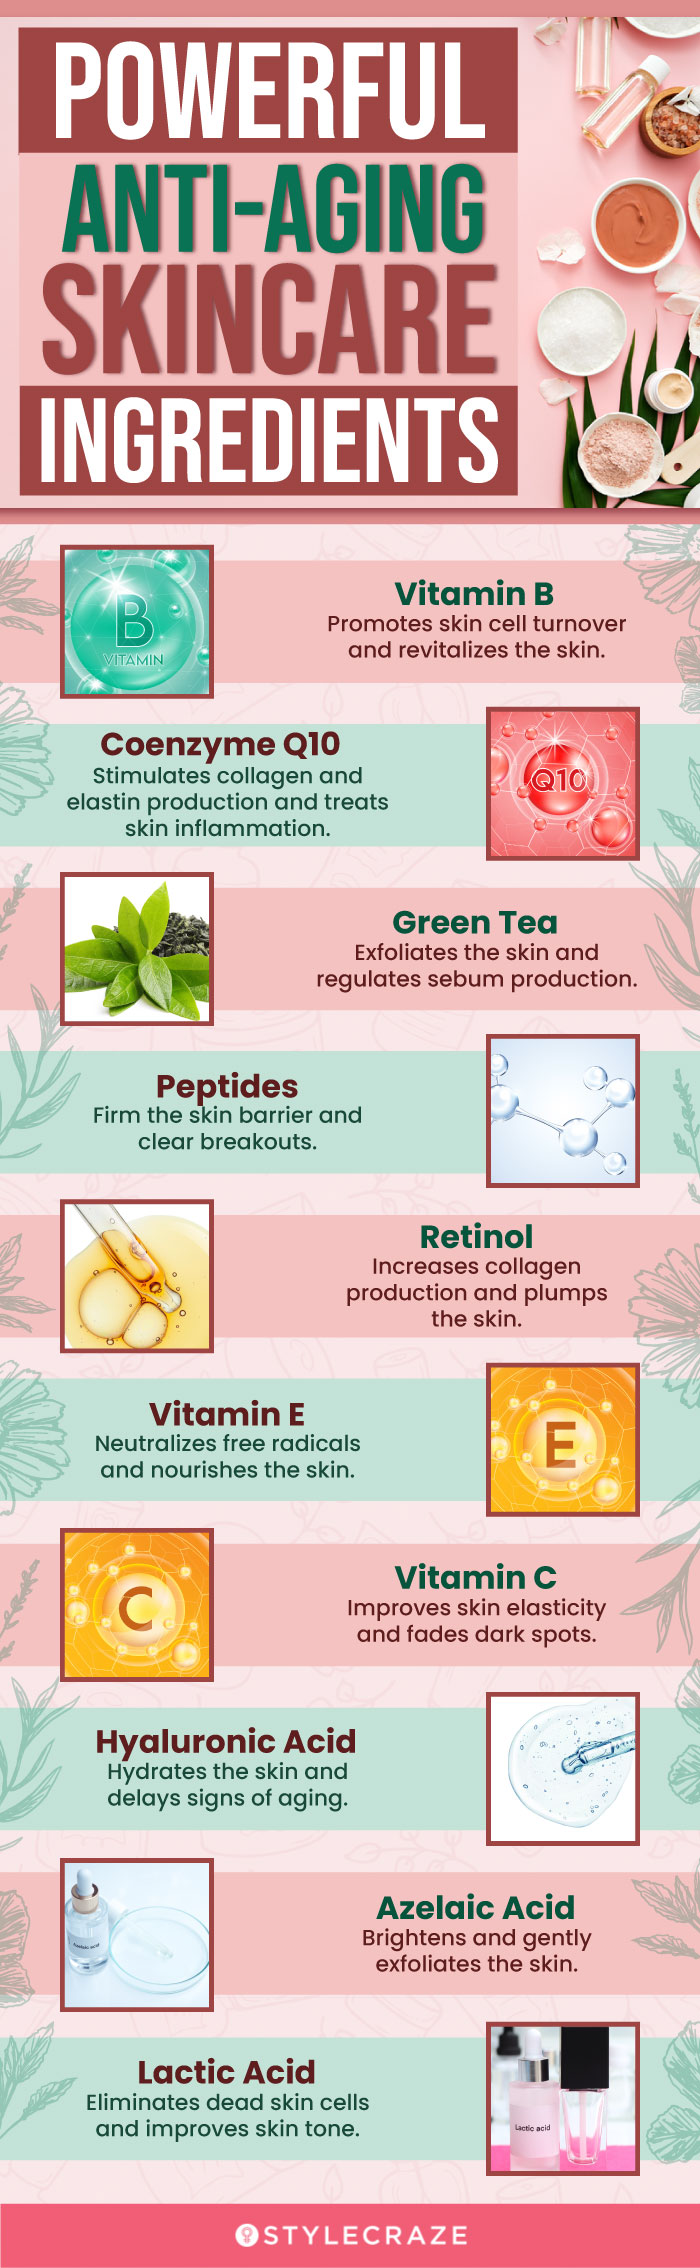 Powerful Anti-Aging Skin Care Ingredients (infographic)